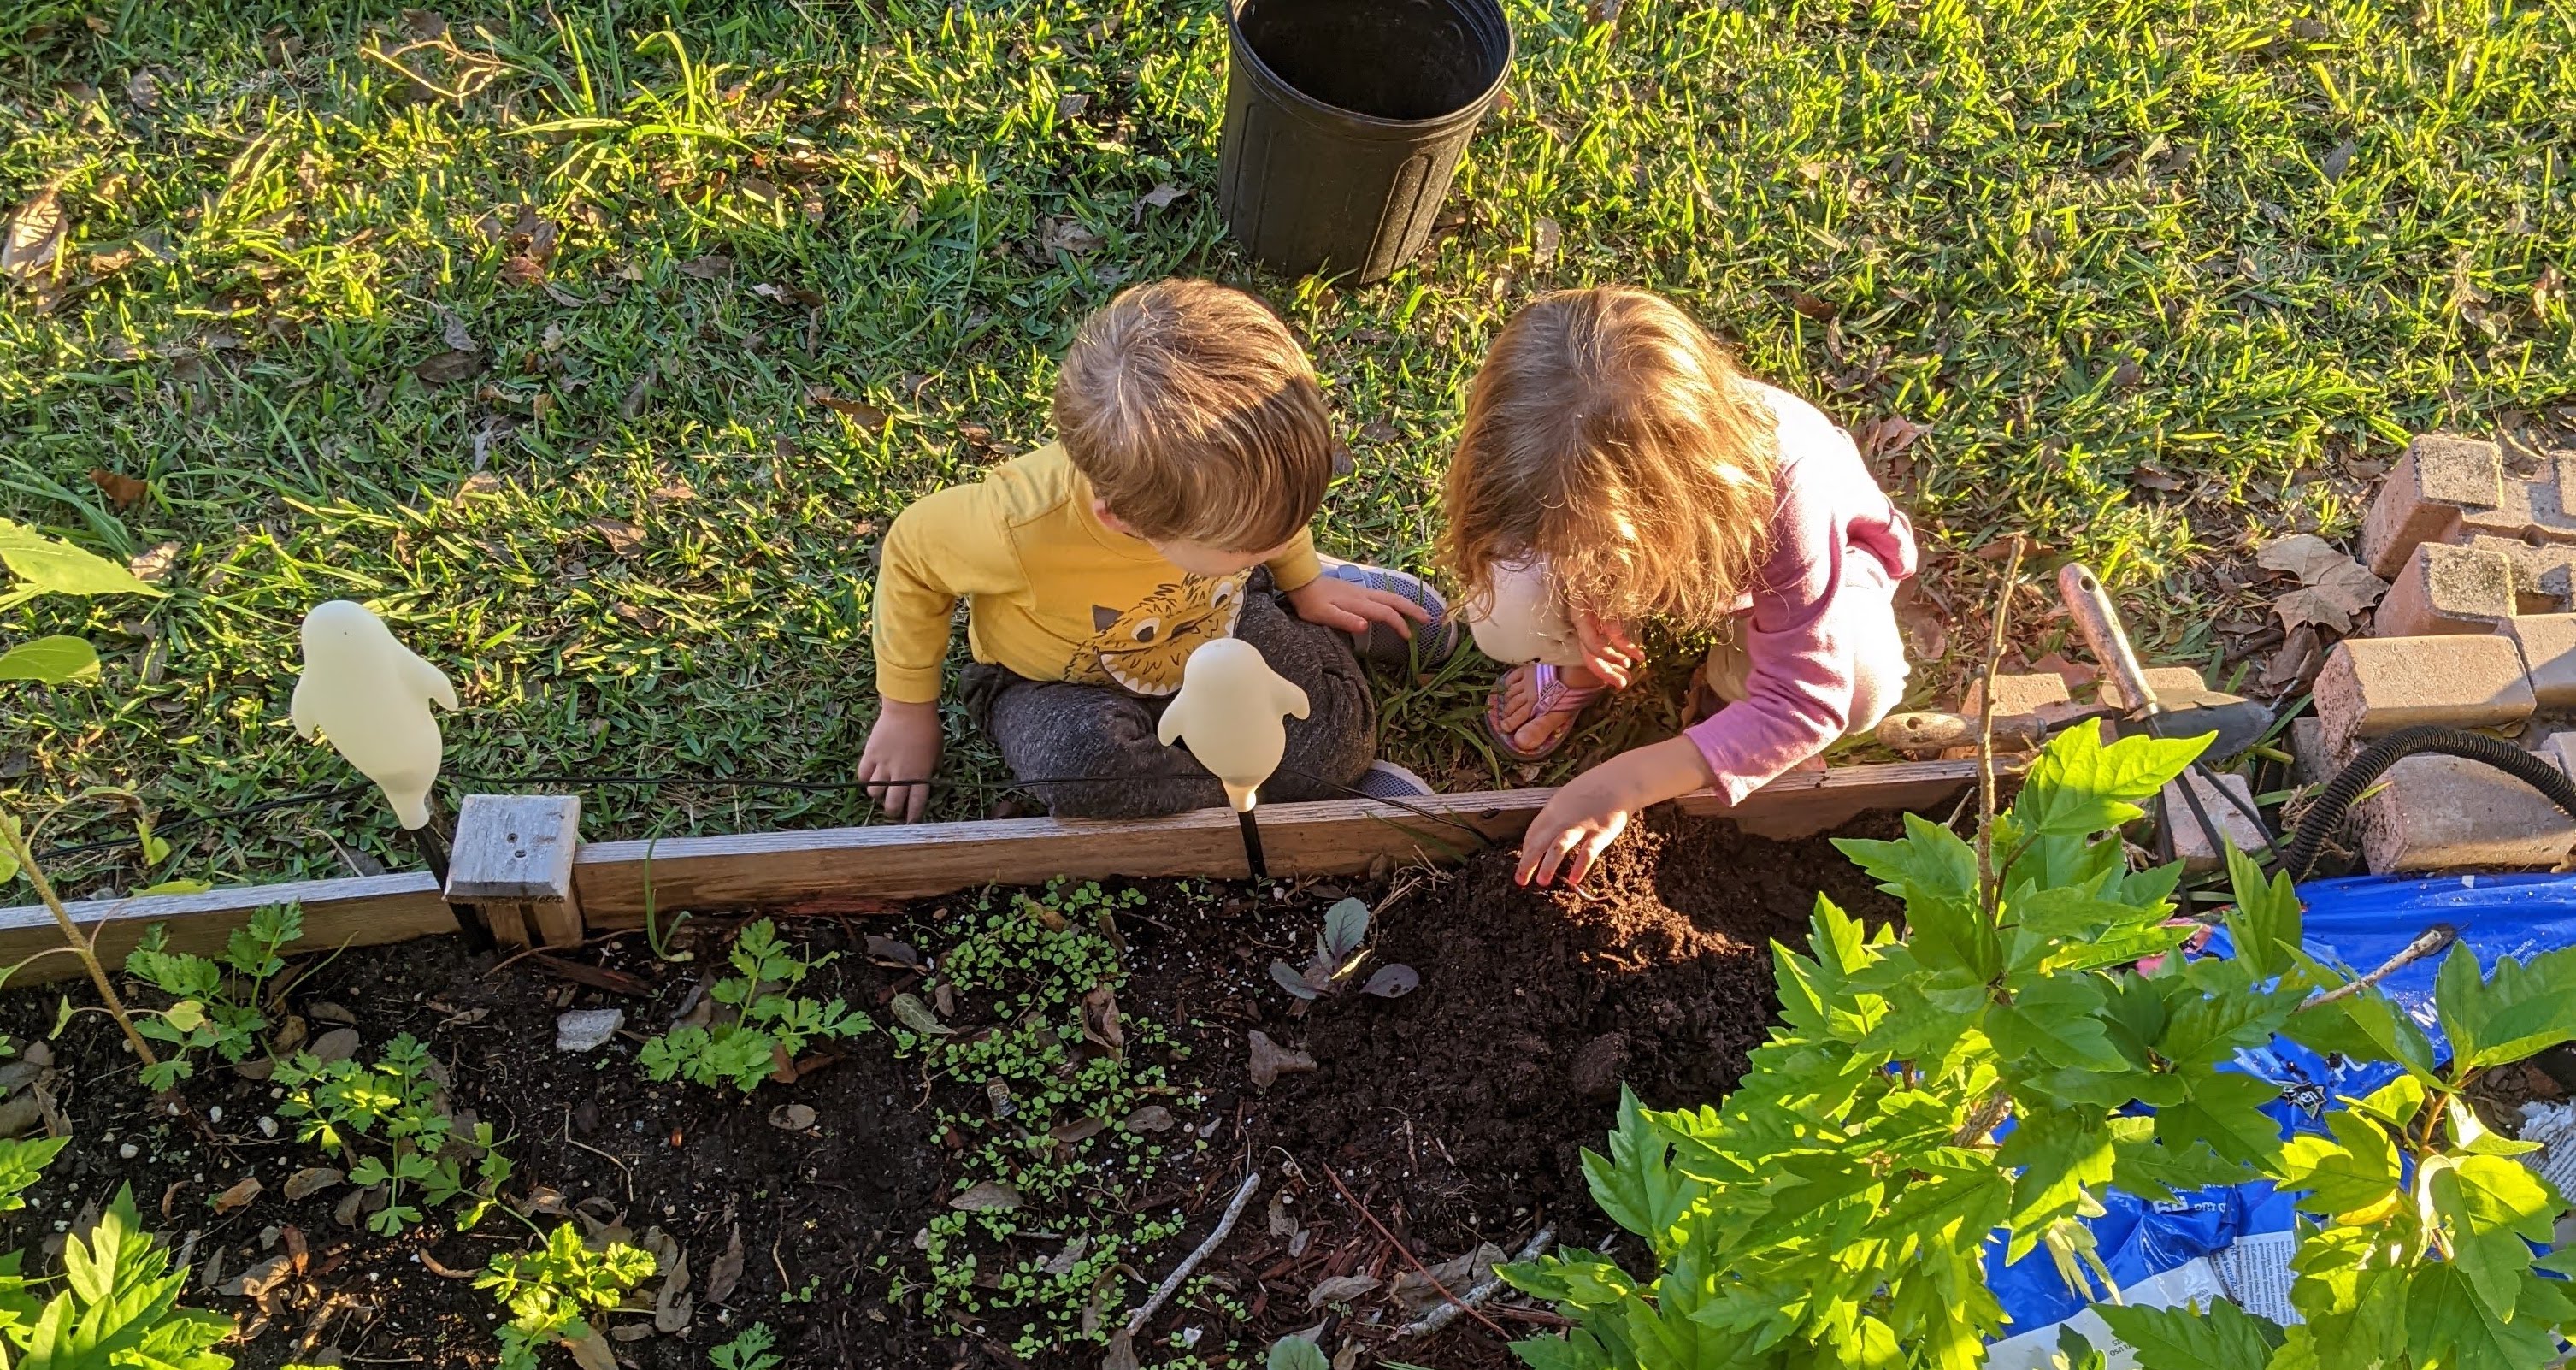 Two small children with light brown hair look down at an earthworm in dark garden soil.